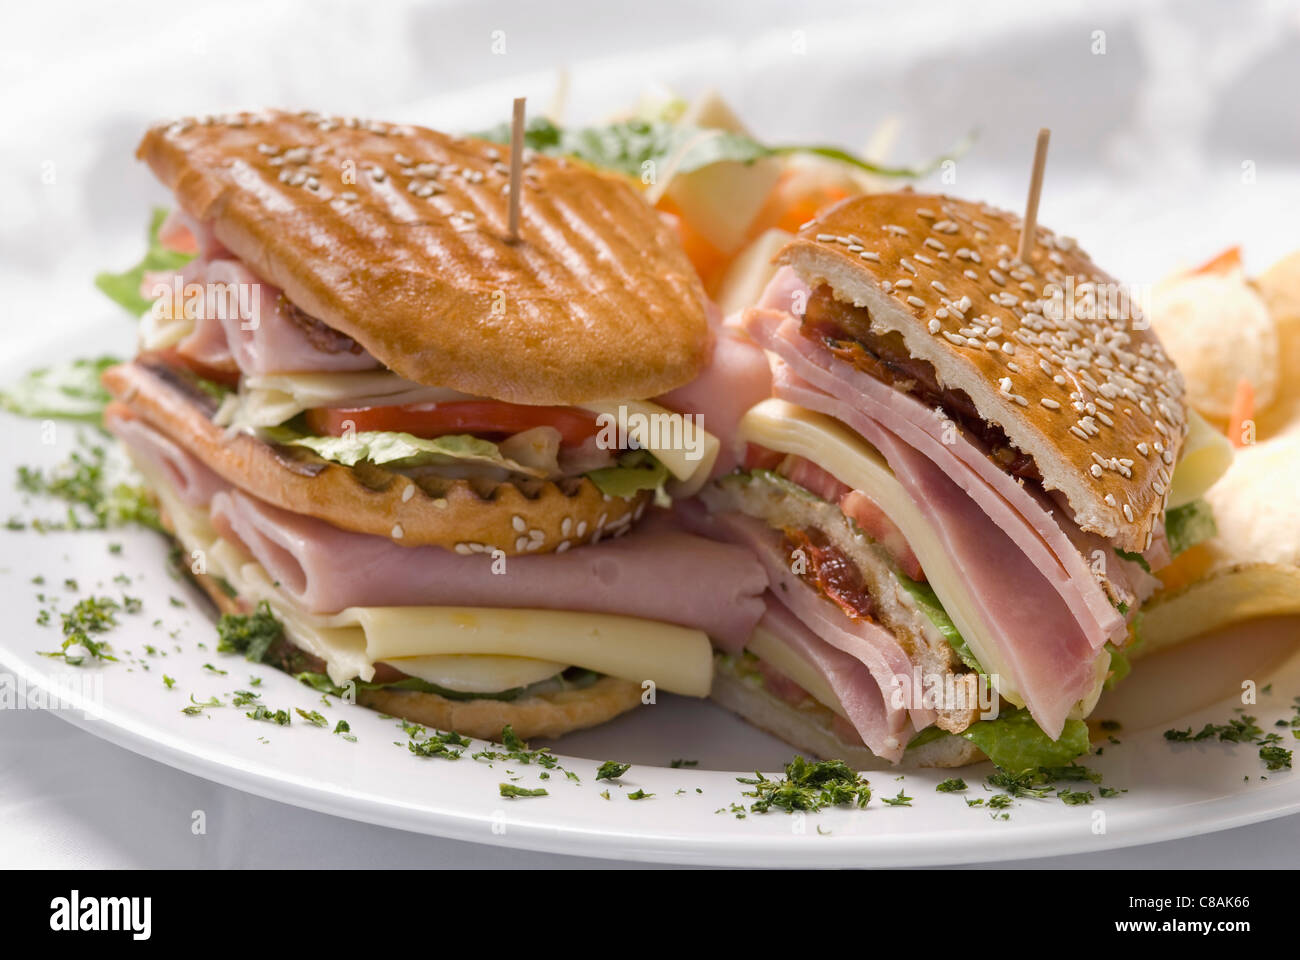 Ham,cheese and vegetable sandwich Stock Photo